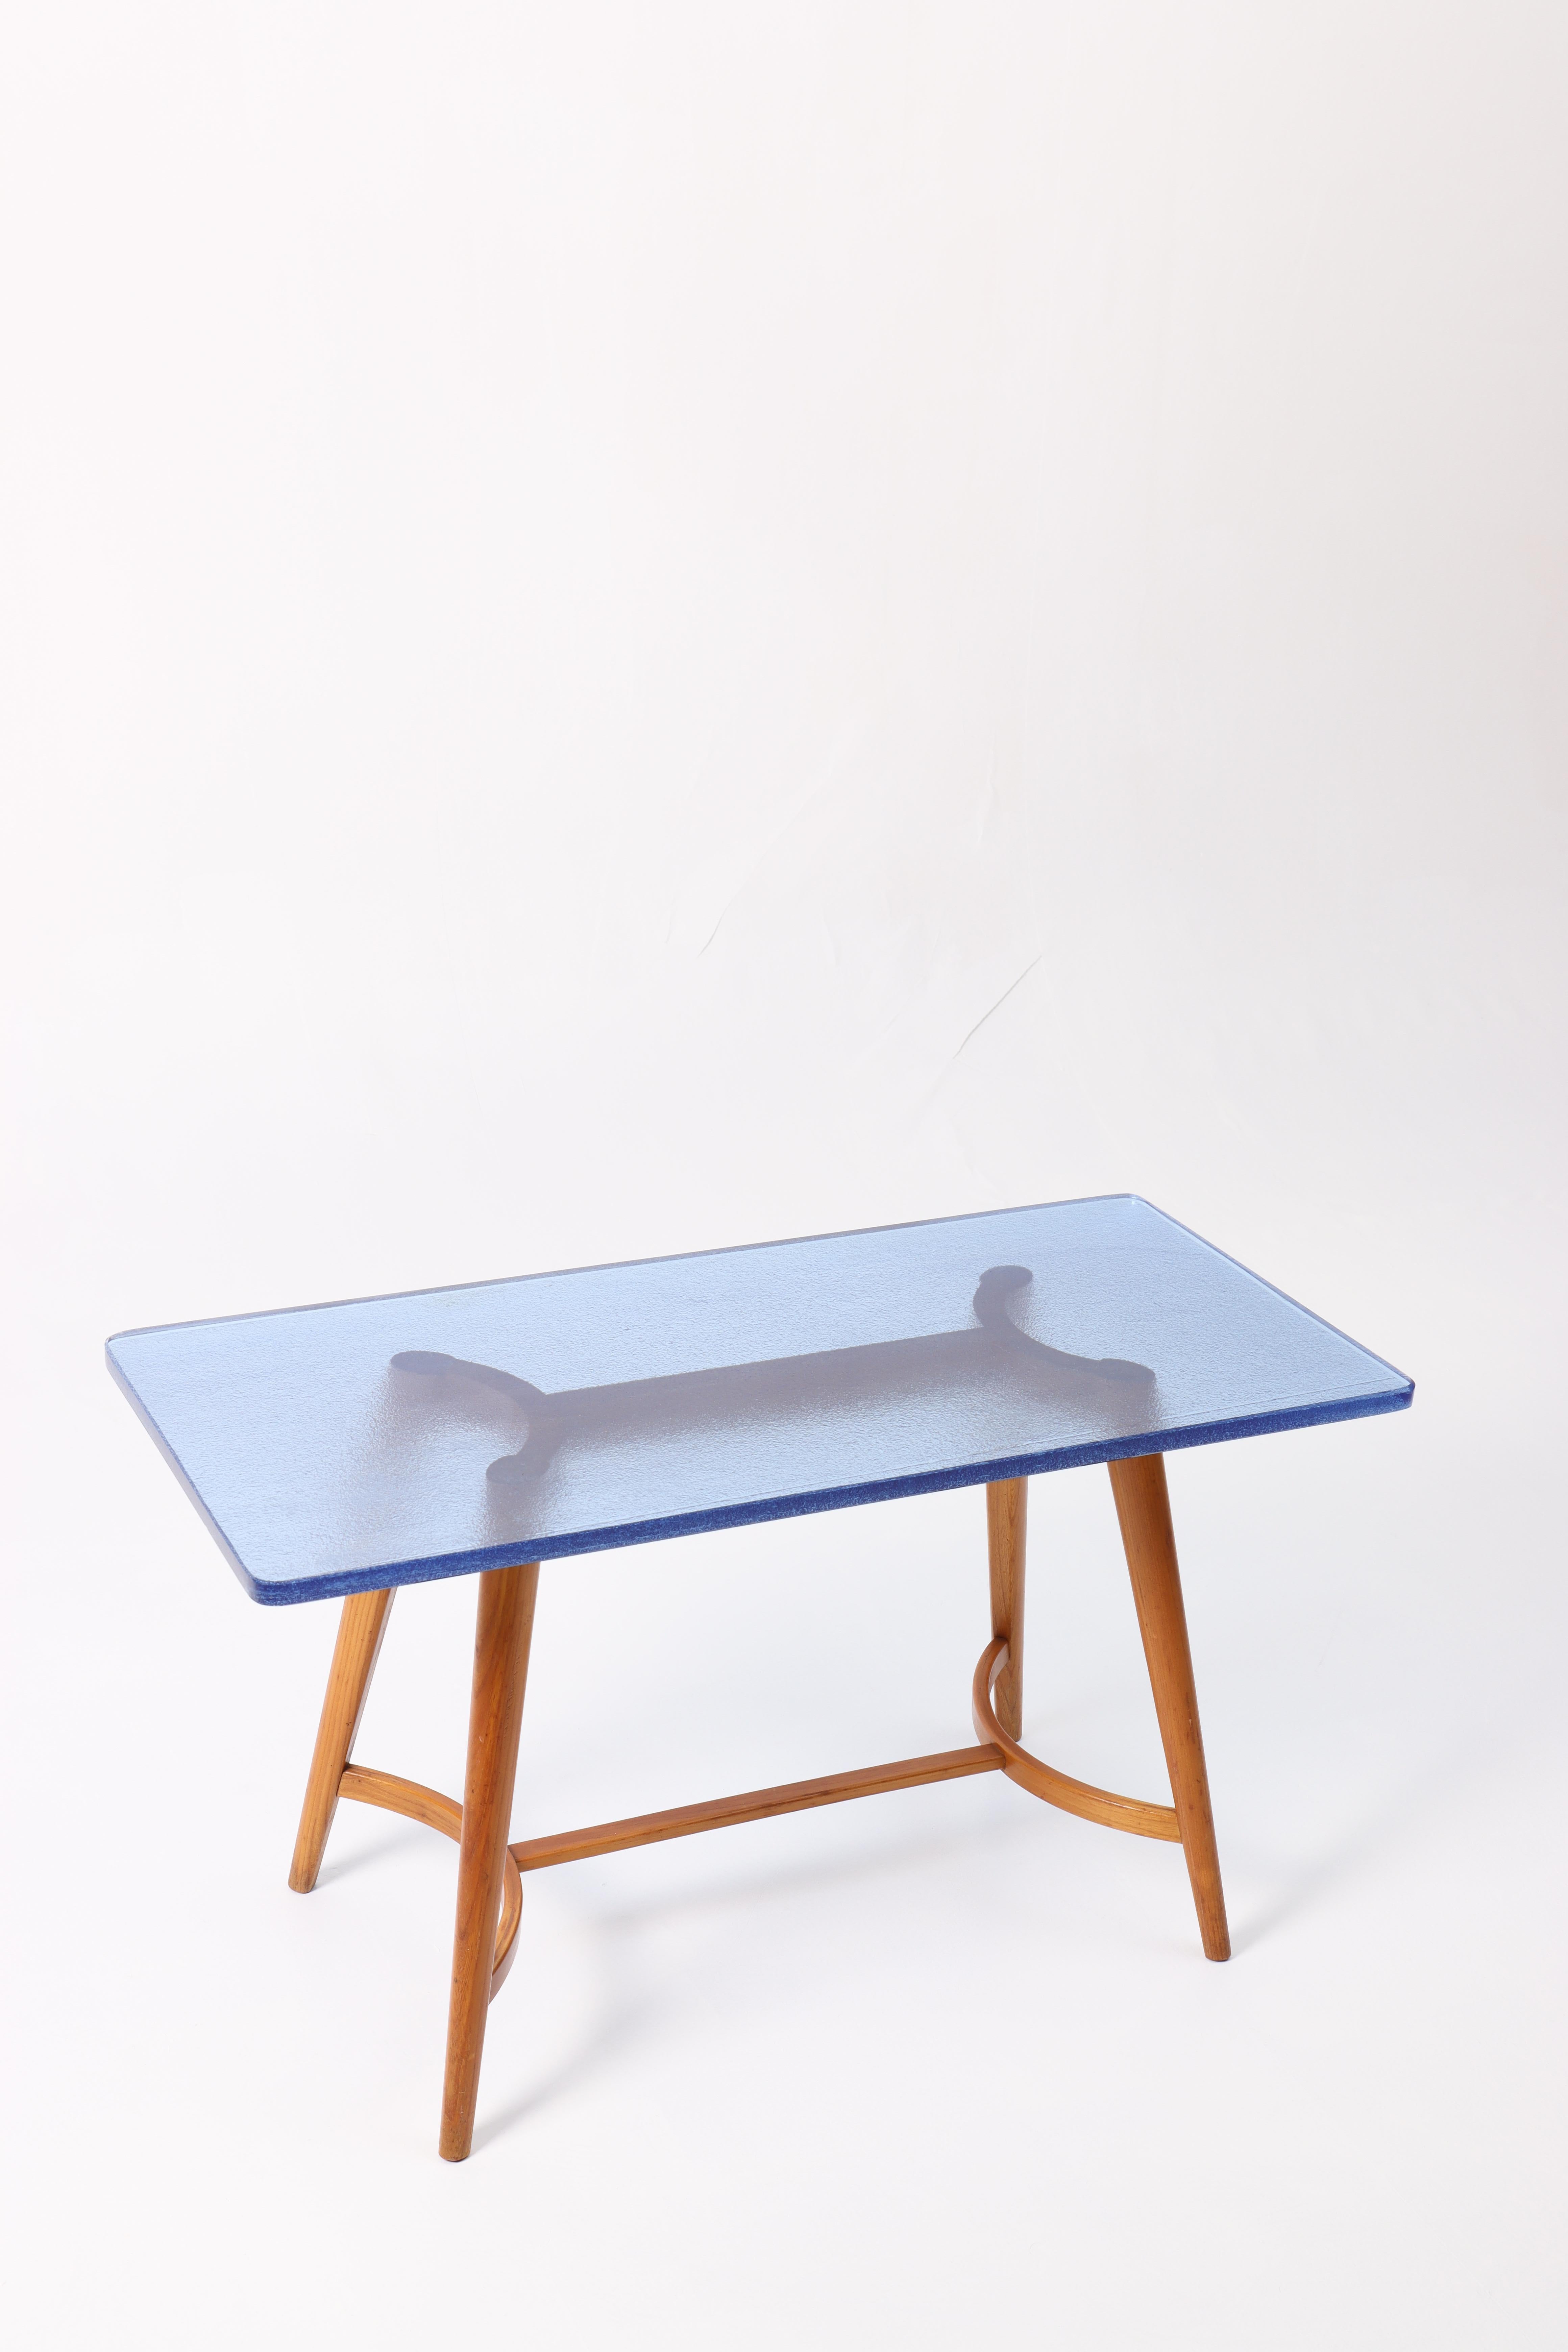 Danish Midcentury Low Table in Glass and Elm, Made in Denmark, 1950s For Sale